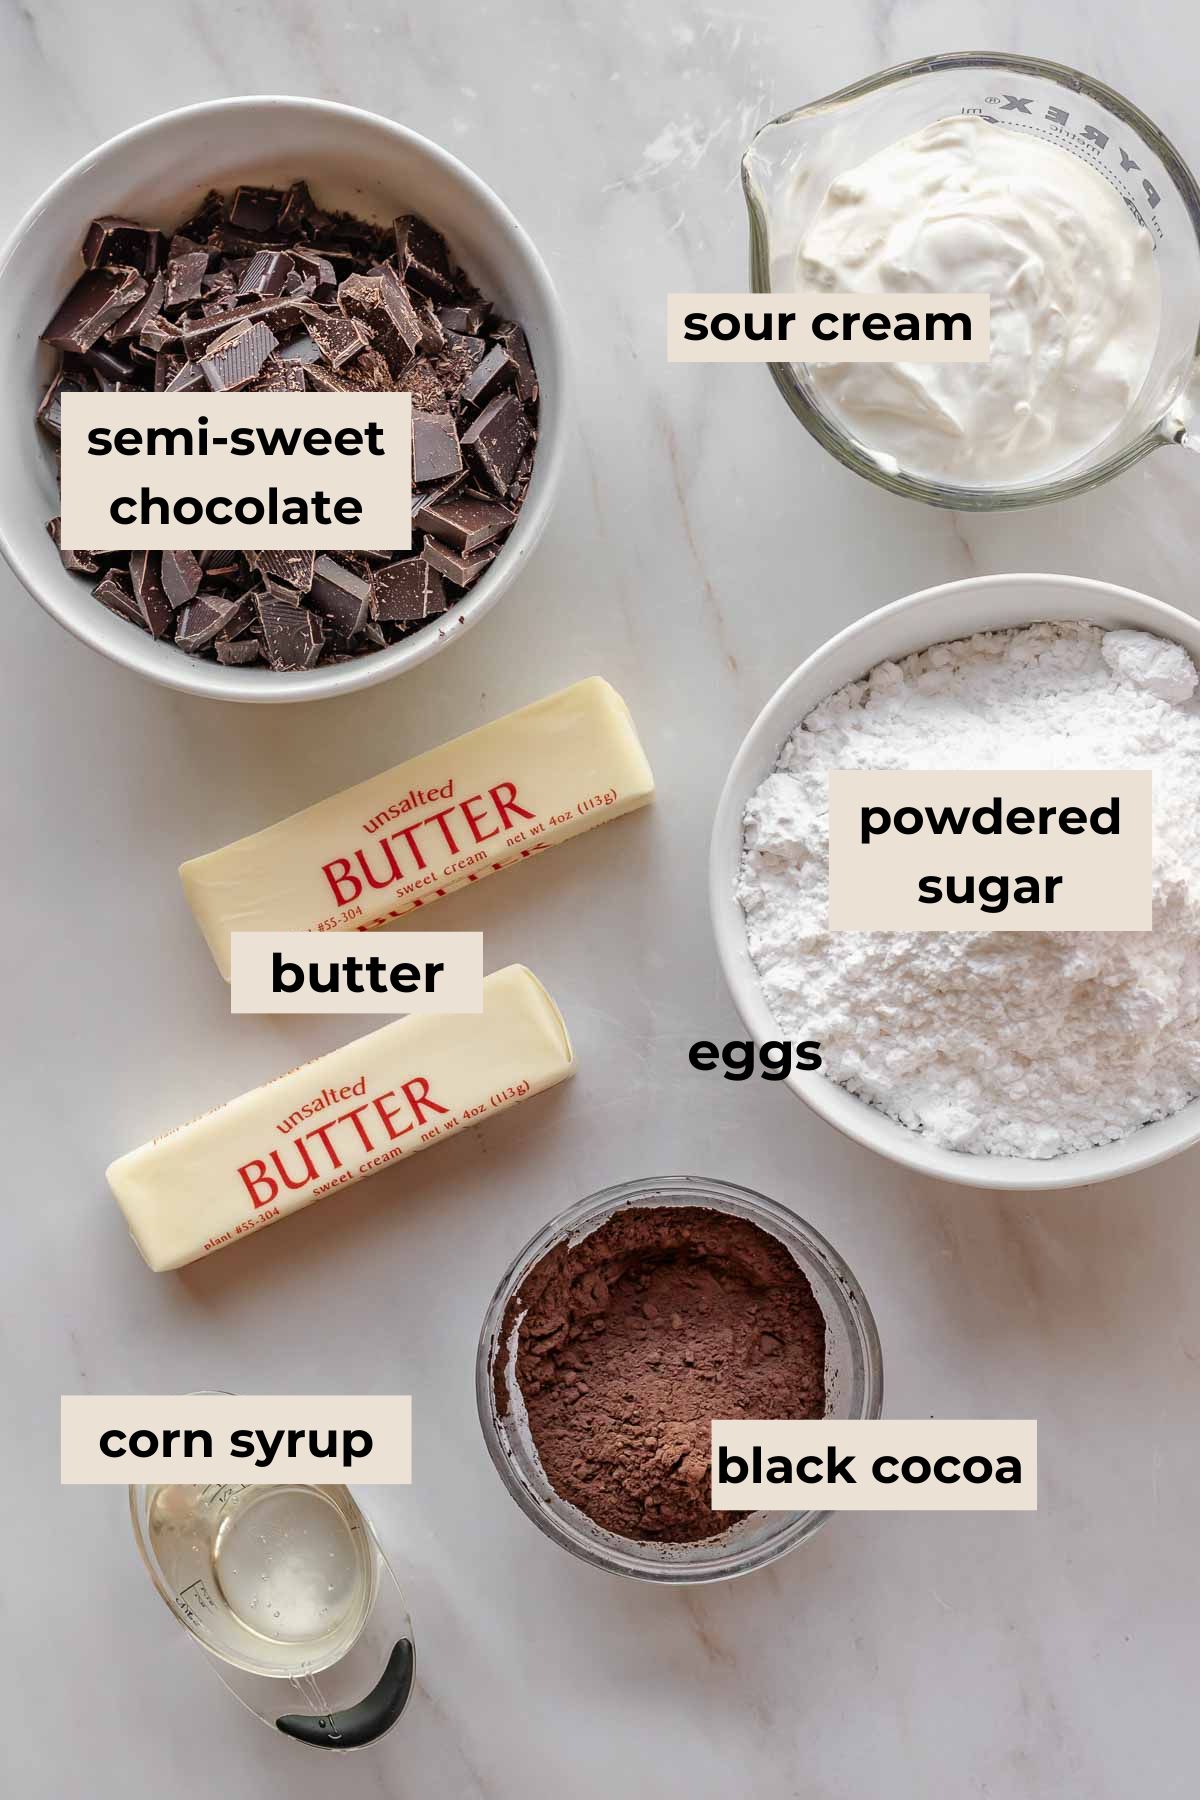 Ingredients for chocolate sour cream frosting.